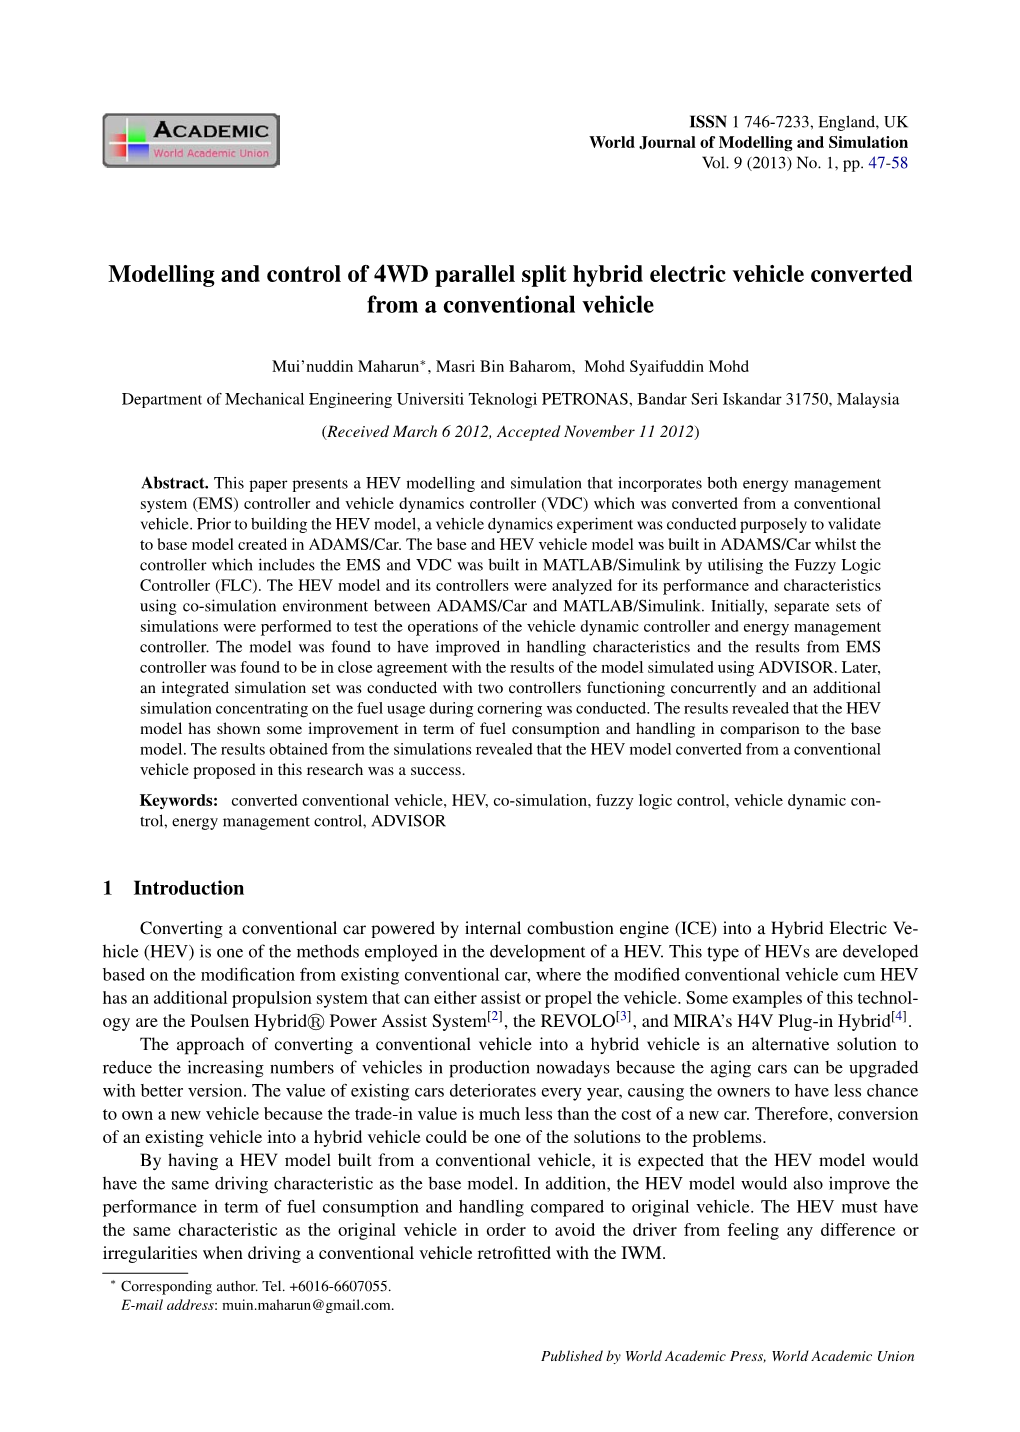 Modelling and Control of 4WD Parallel Split Hybrid Electric Vehicle Converted from a Conventional Vehicle